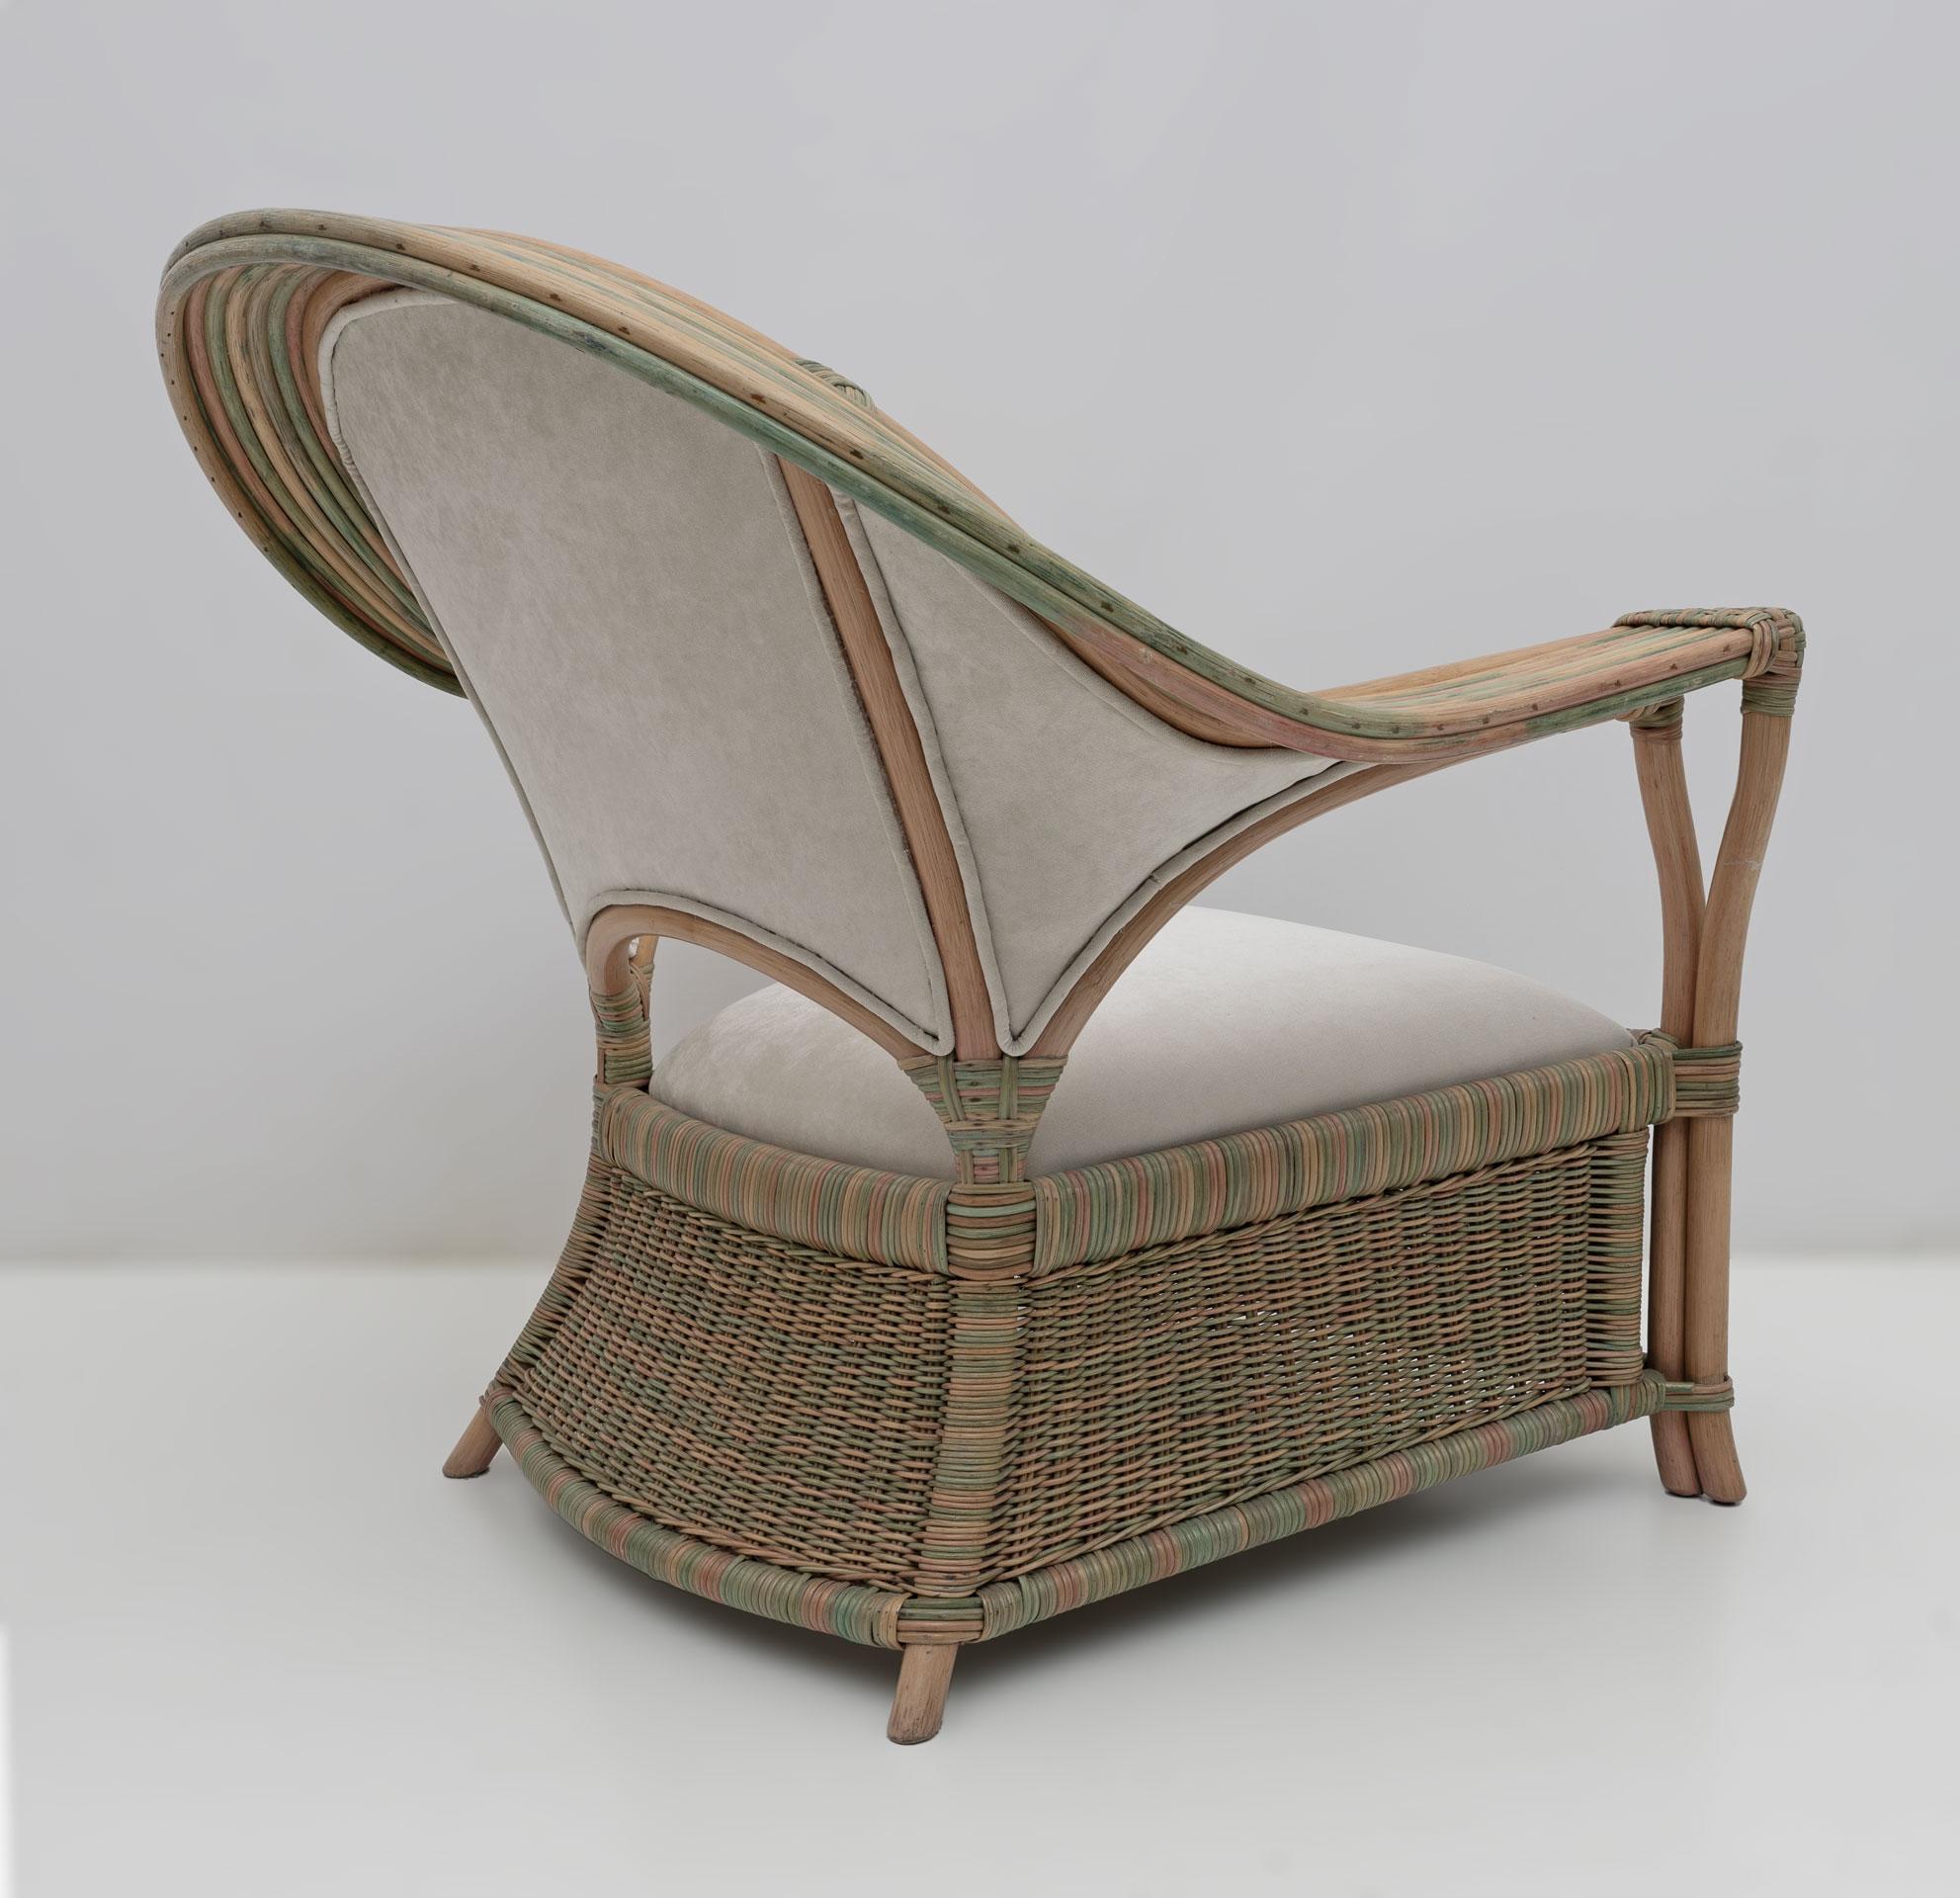 Pair of Mid-century Modern Italian Rattan and Wicker Armchairs, 1970s For Sale 5